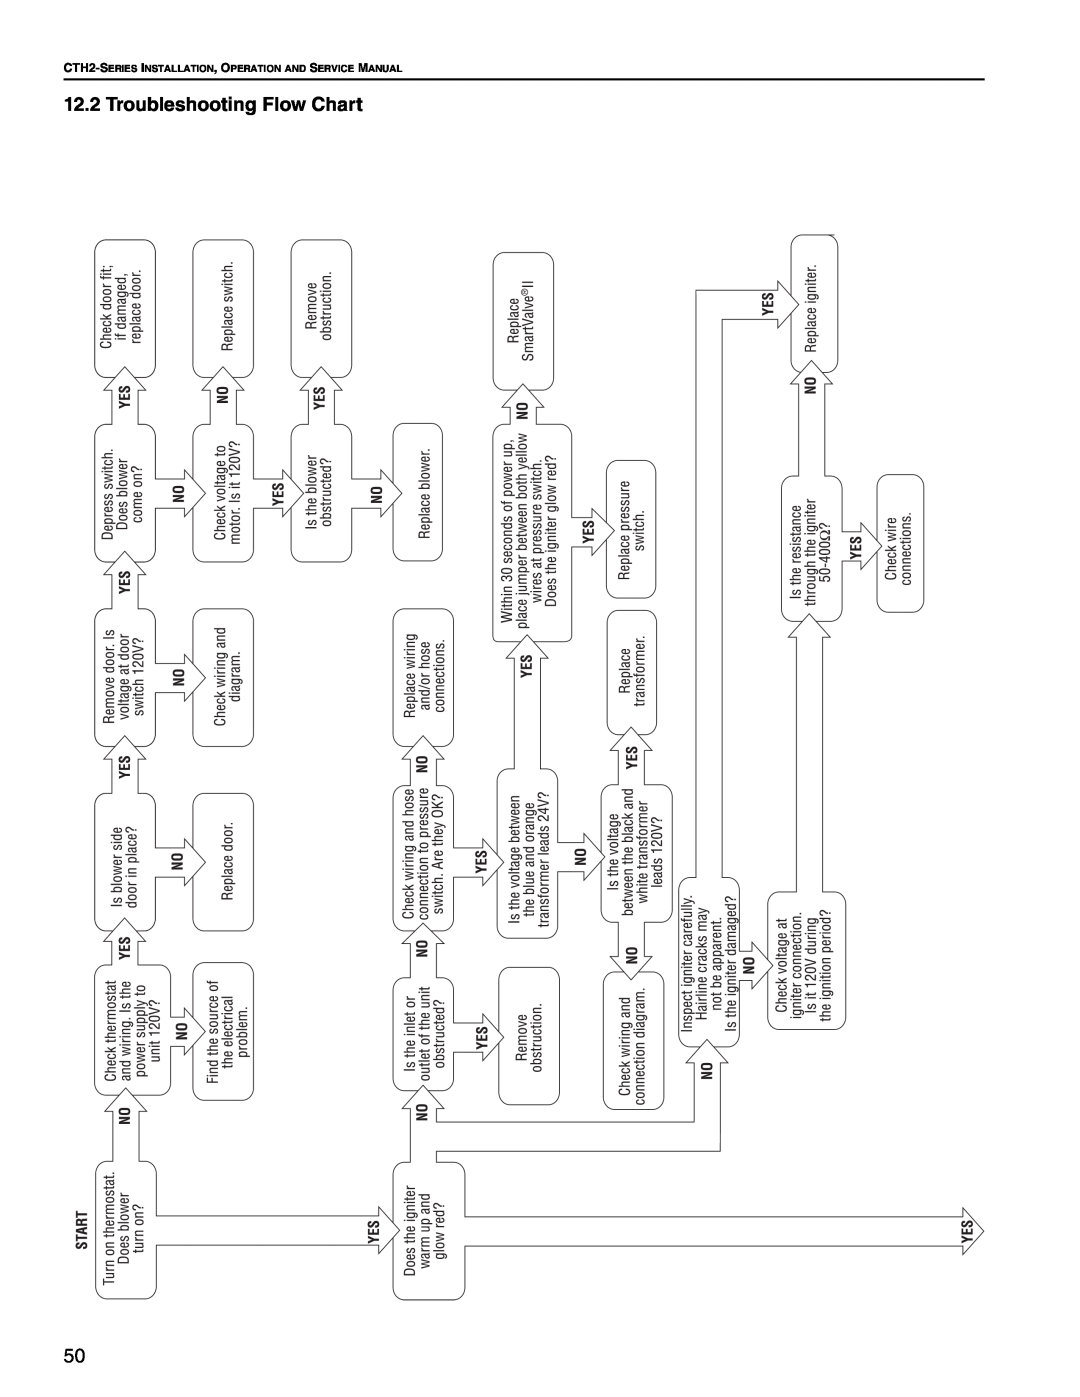 Roberts Gorden CTH2-100, CTH2-125, CTH2-80, CTH2-150, CTH2-175, CTH2-40 CTH2-60 service manual Troubleshooting Flow Chart 